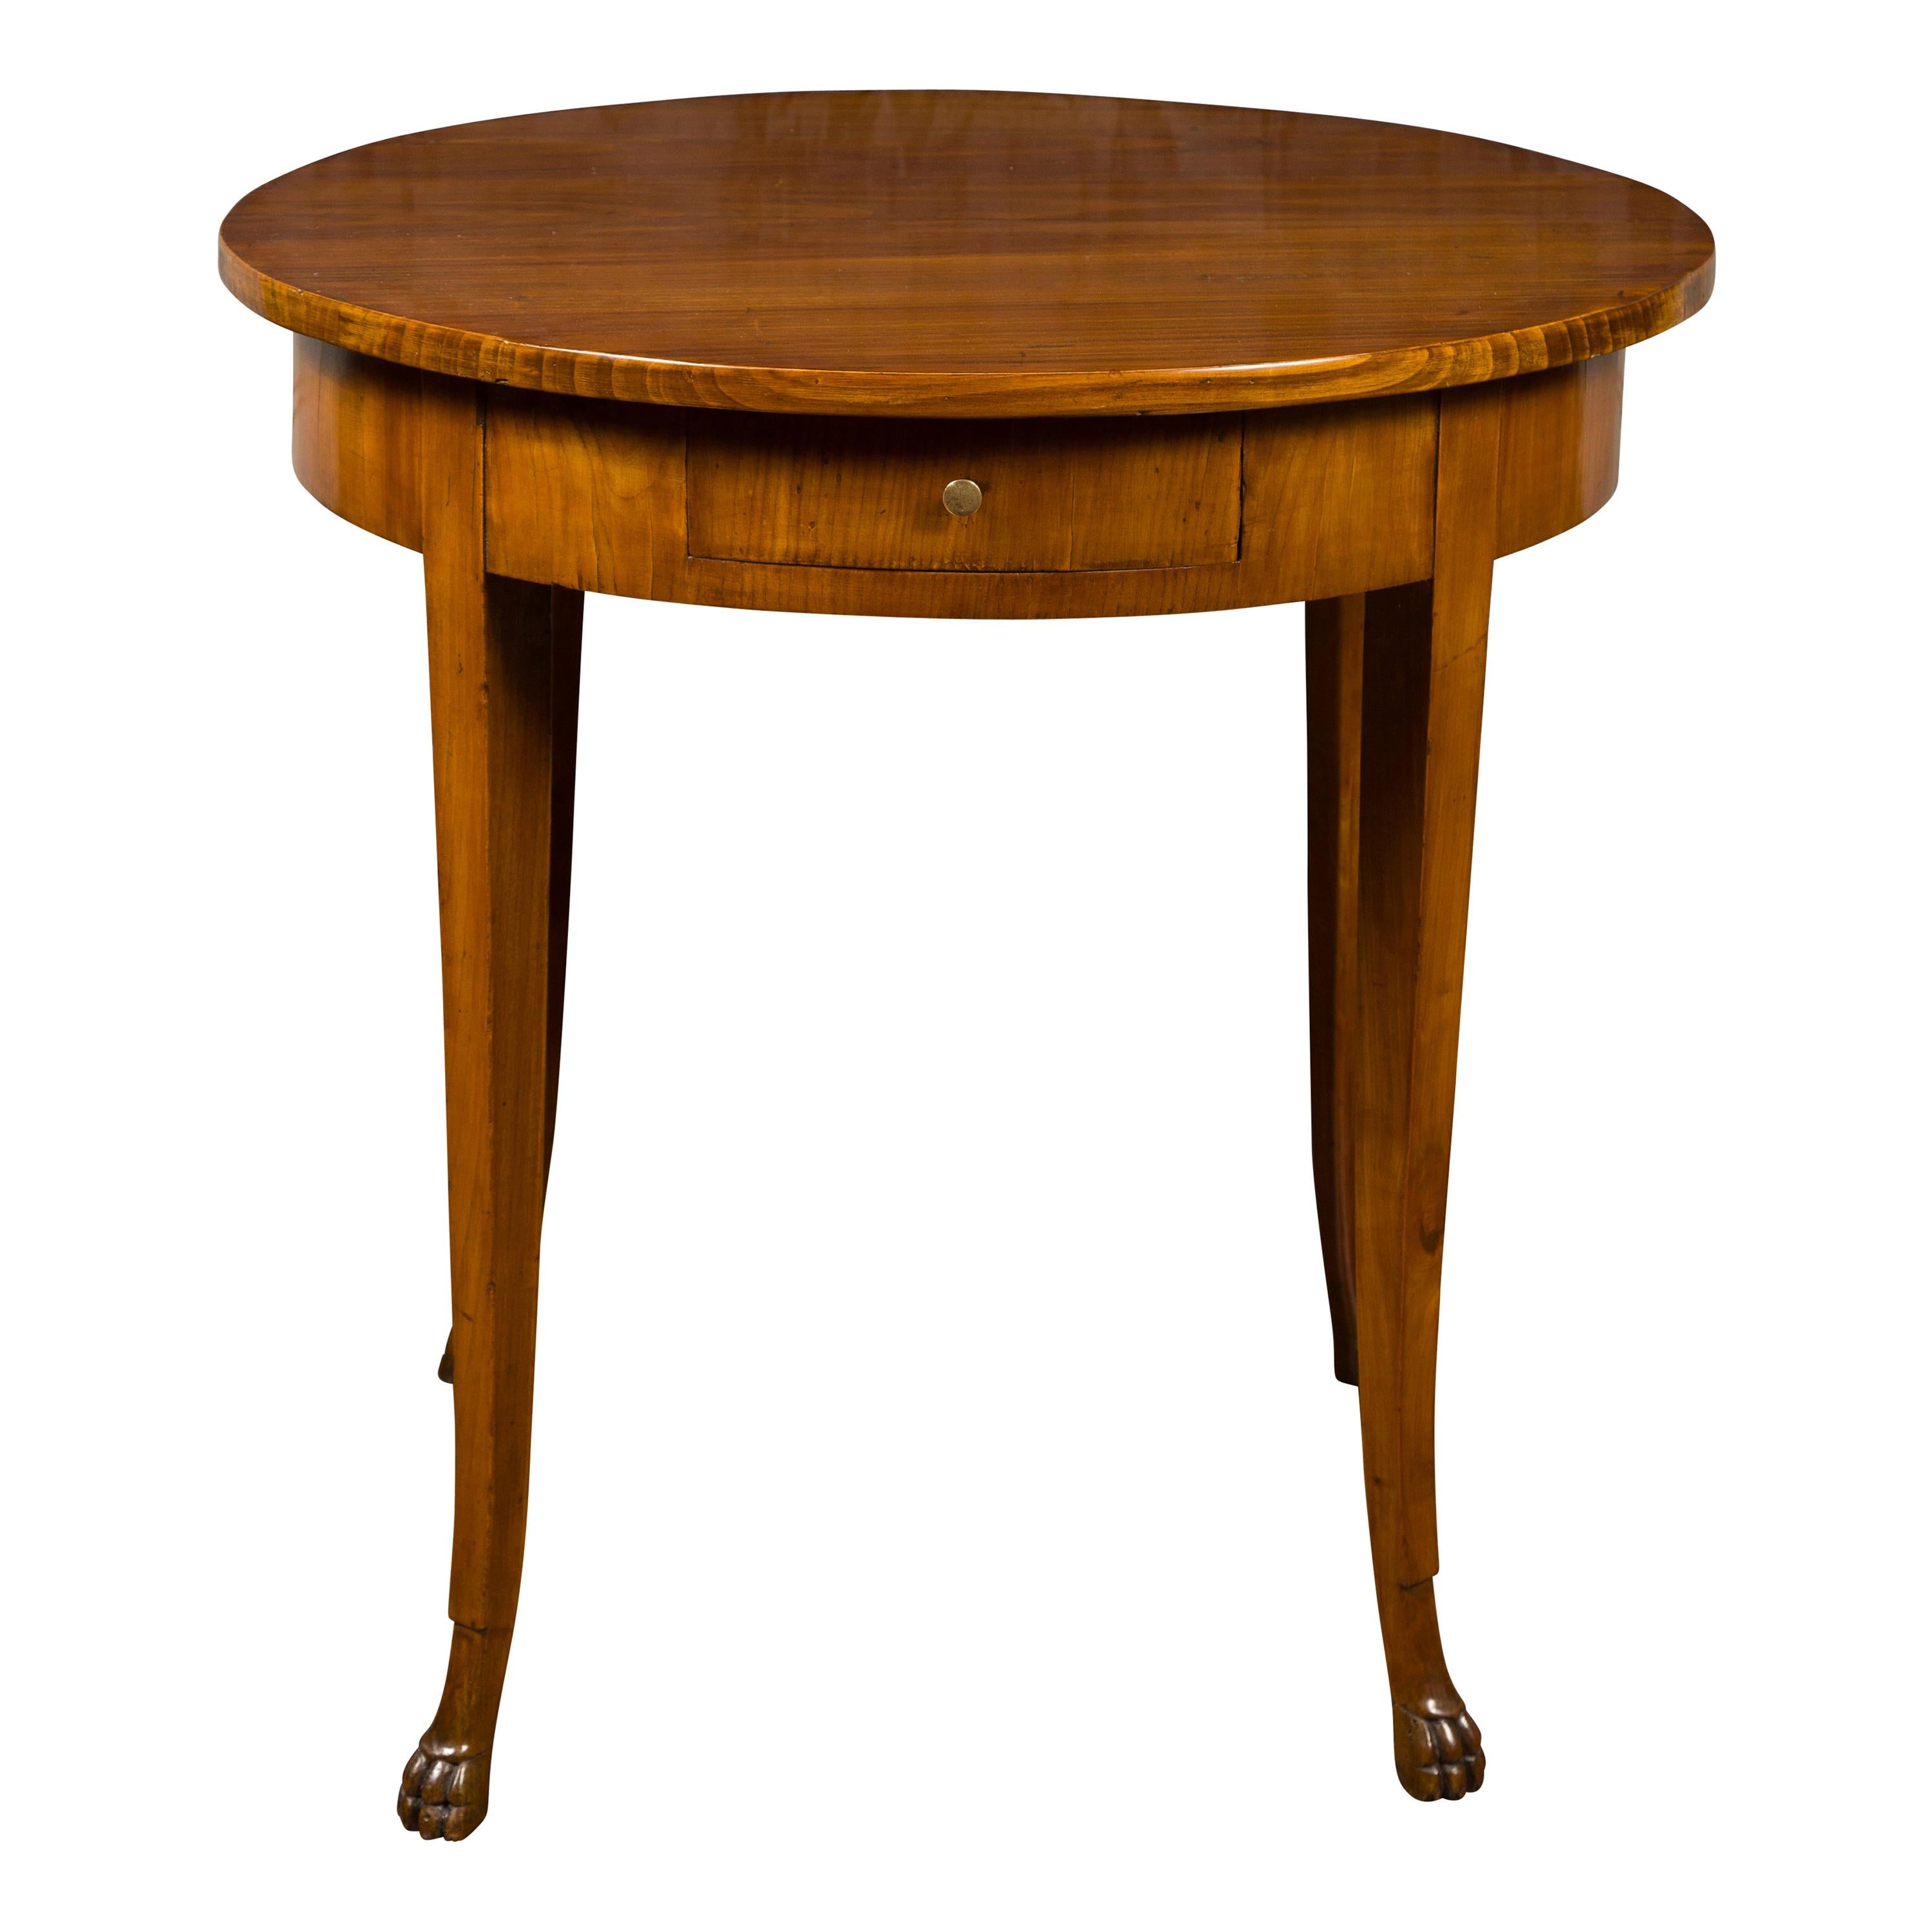 French 1840s Louis-Philippe Walnut Table with Single Drawer and Paw Feet